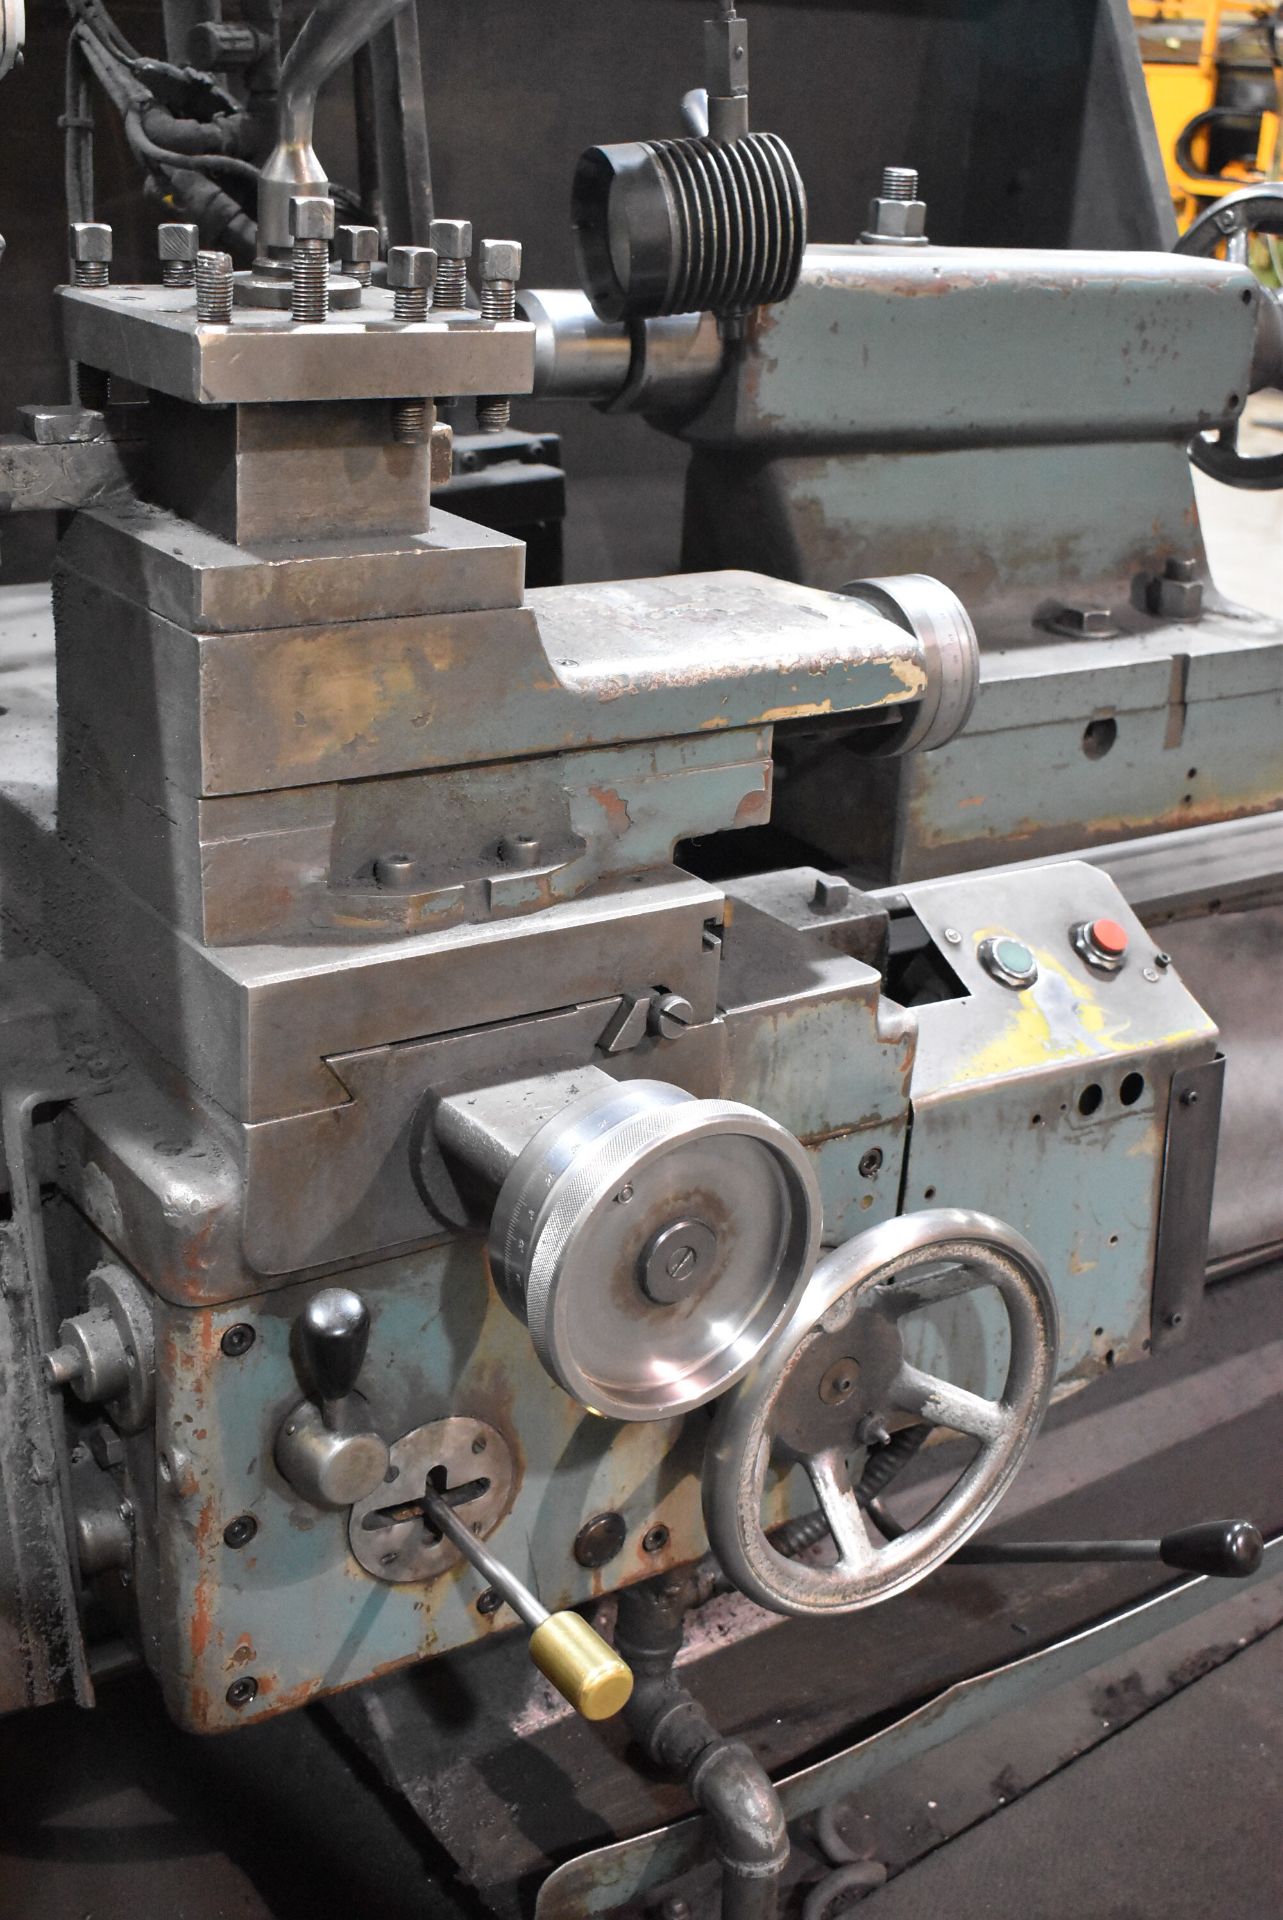 TOS SN 71 C GAP BED ENGINE LATHE WITH 30" SWING, 120" BETWEEN CENTERS, 3" SPINDLE BORE, SPEEDS TO - Image 3 of 12